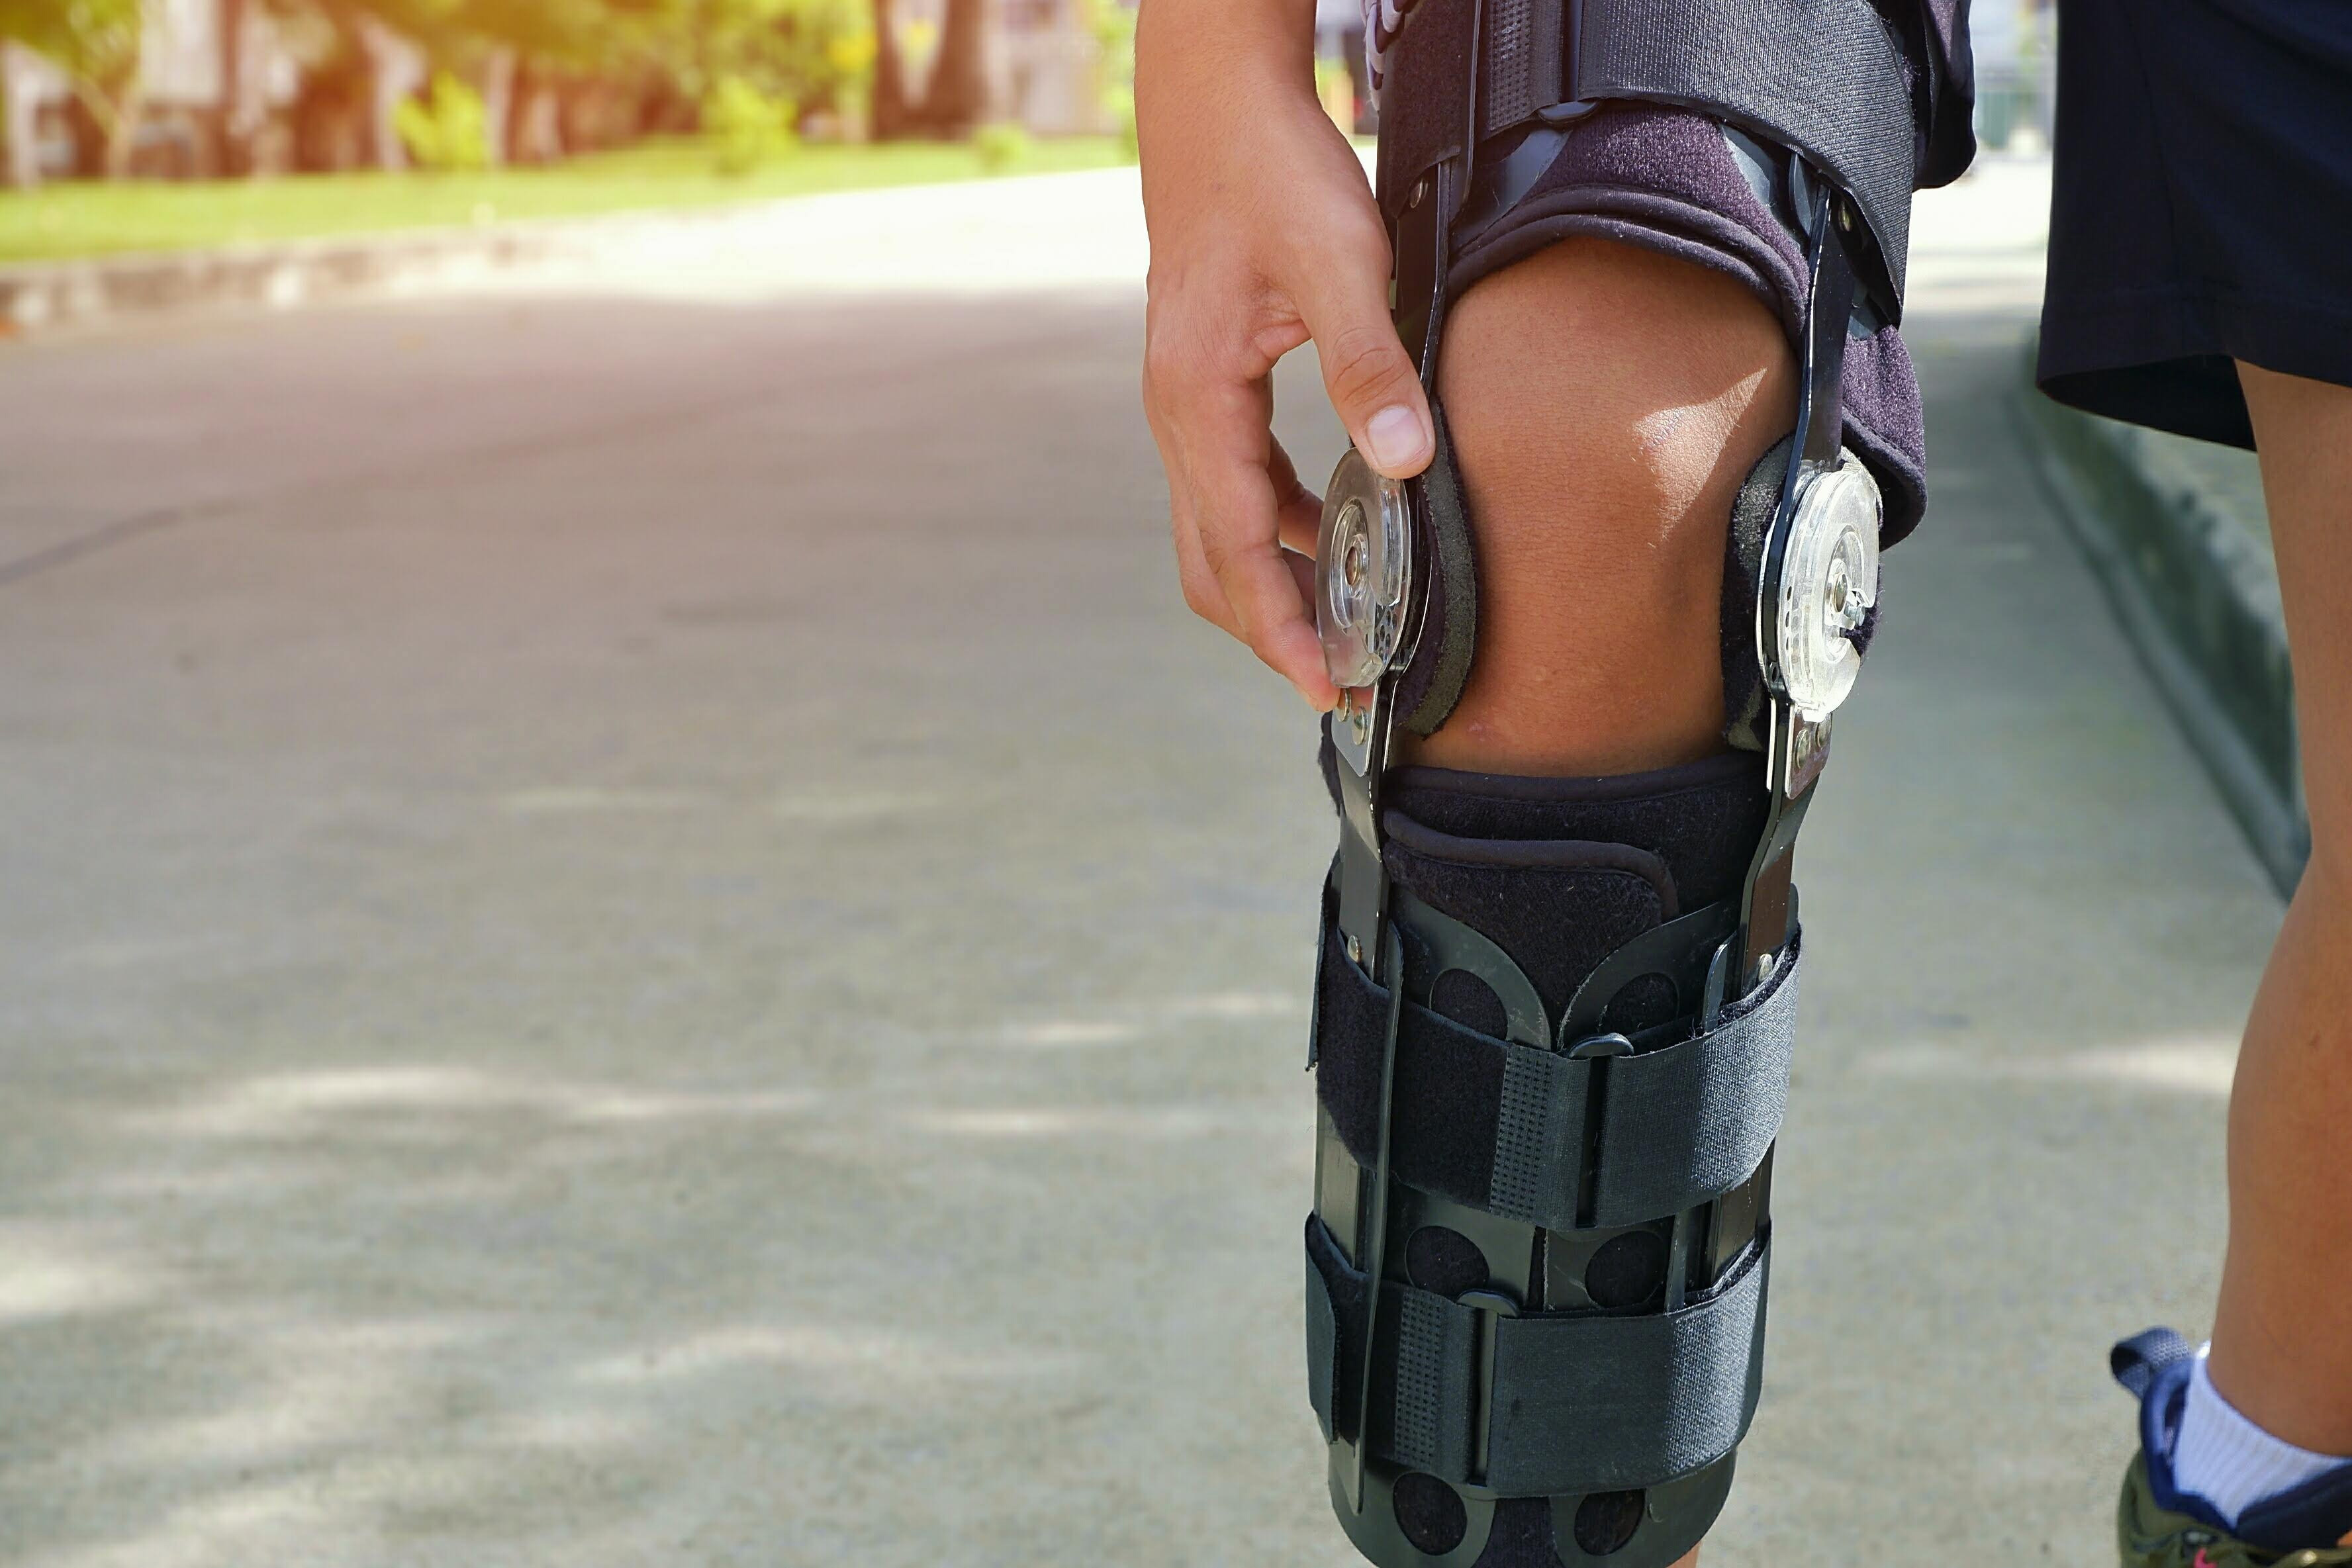 Image of a knee based orthoses providing stability to knee and lower limb function